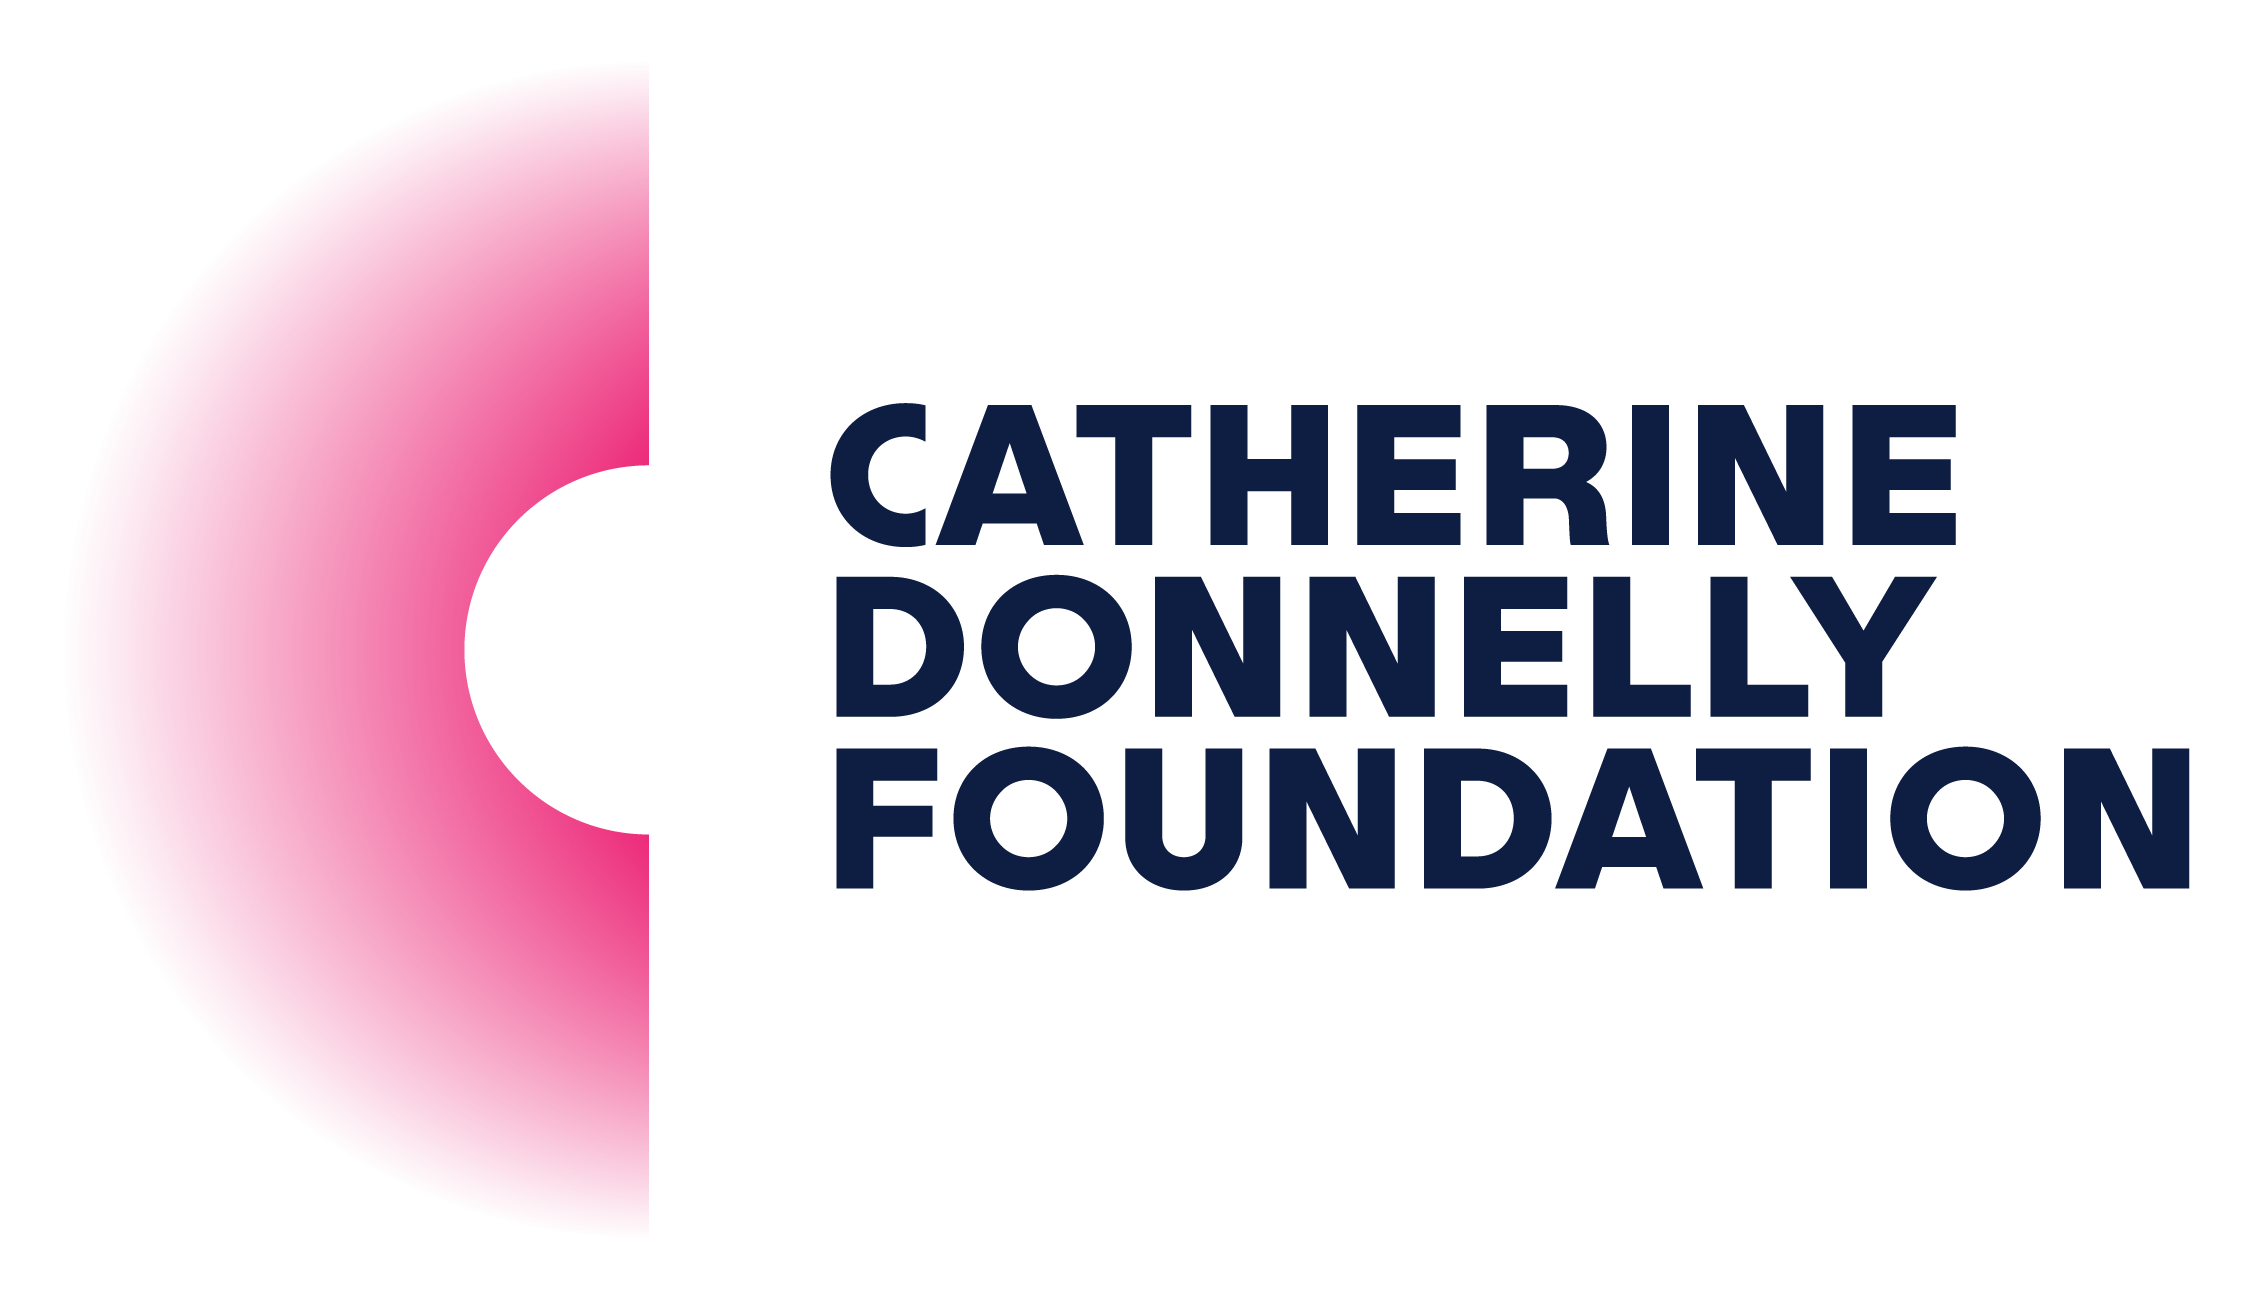 https://ppforum.ca/wp-content/uploads/2020/03/Catherine-Donnelly-Foundation.png